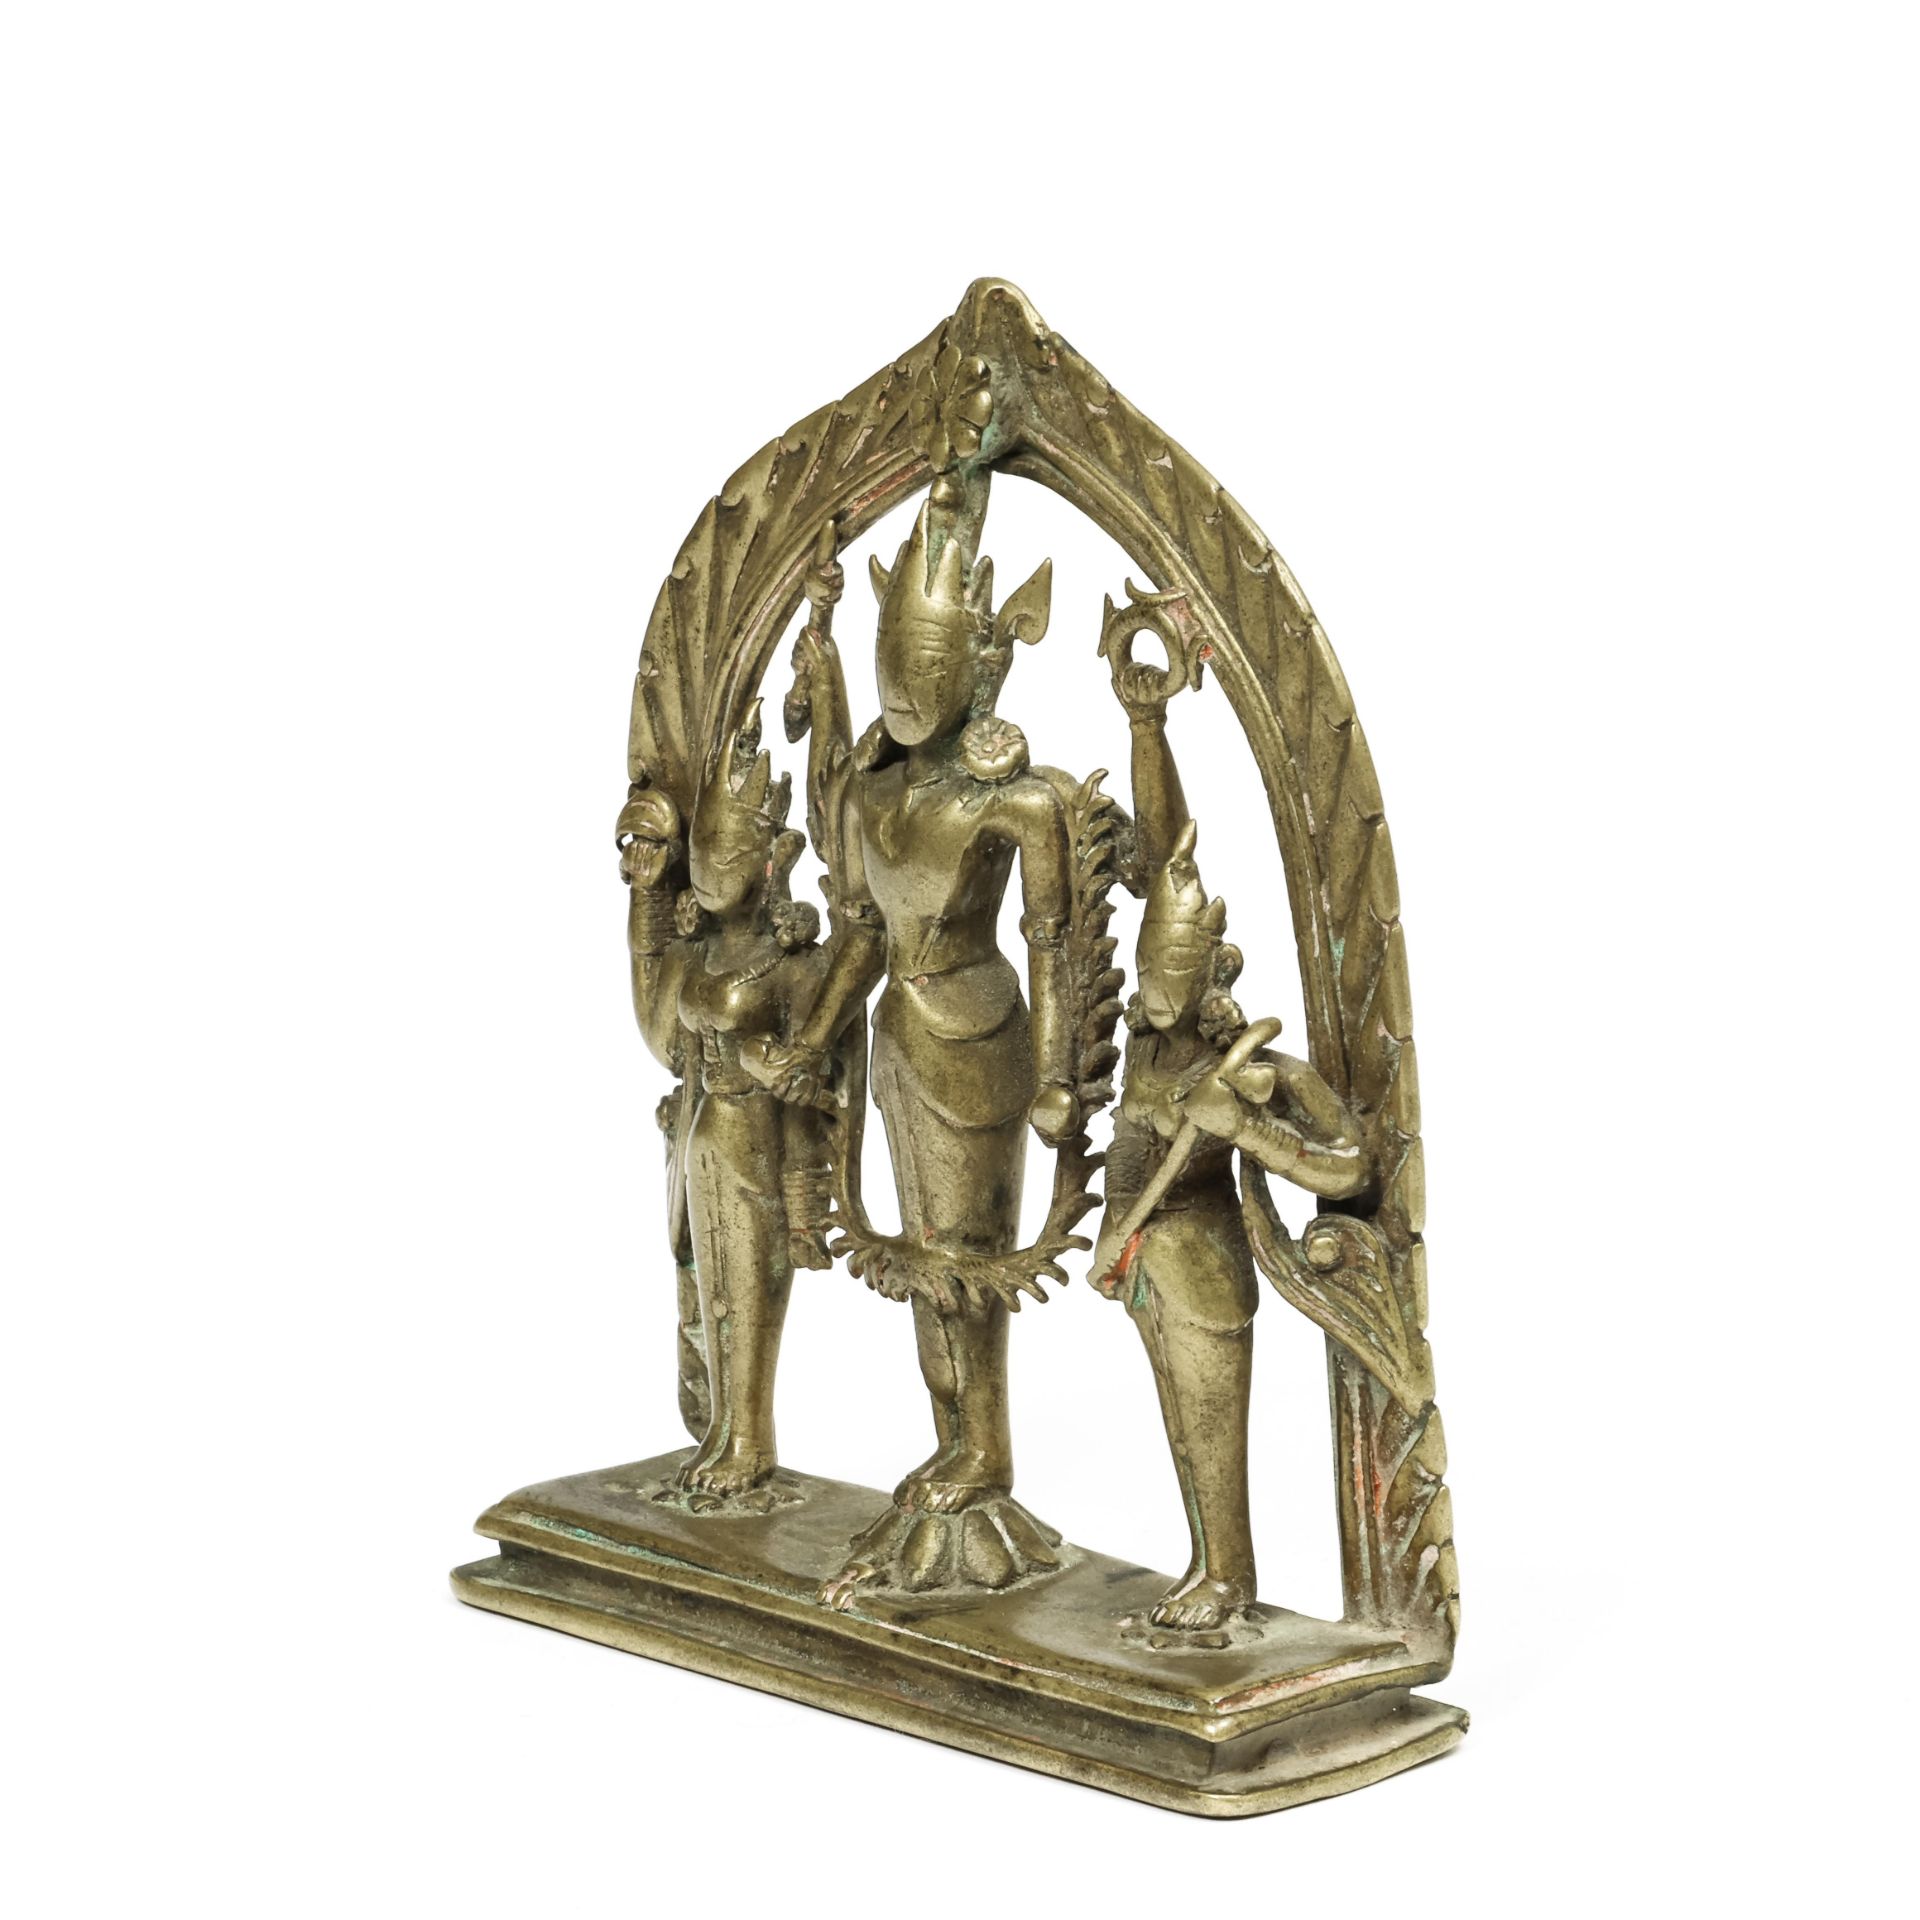 North West India, Himichal Pradesh, a brass altar, 19th century, - Image 2 of 4